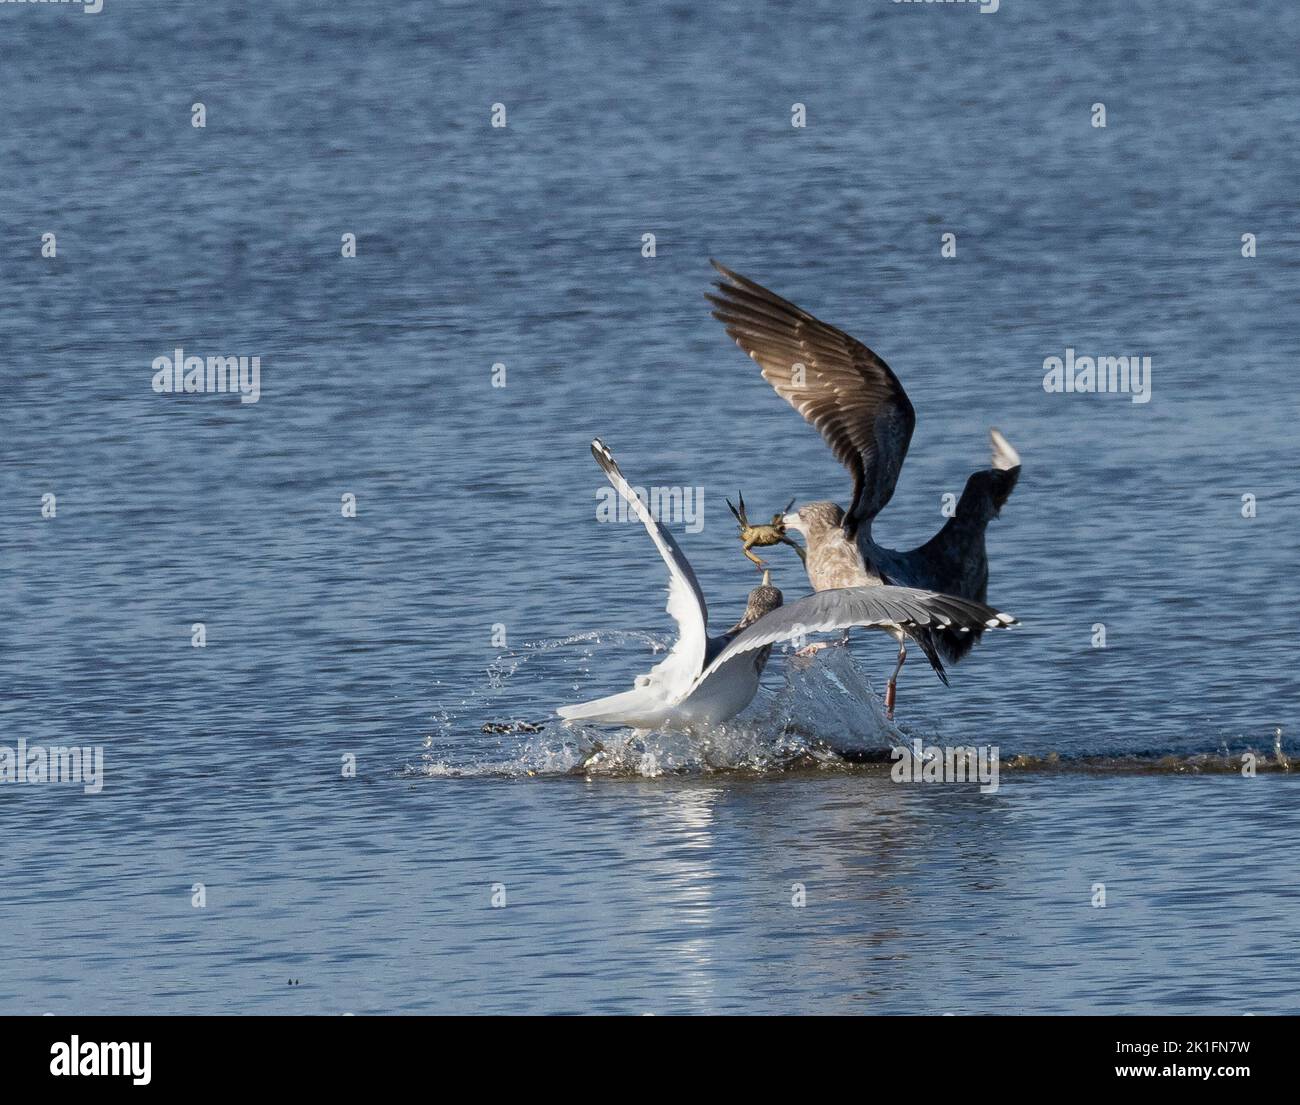 Adult Herring Gull (Larus argentatus) attempts to steal small crab from juvenile Herring Gull Stock Photo